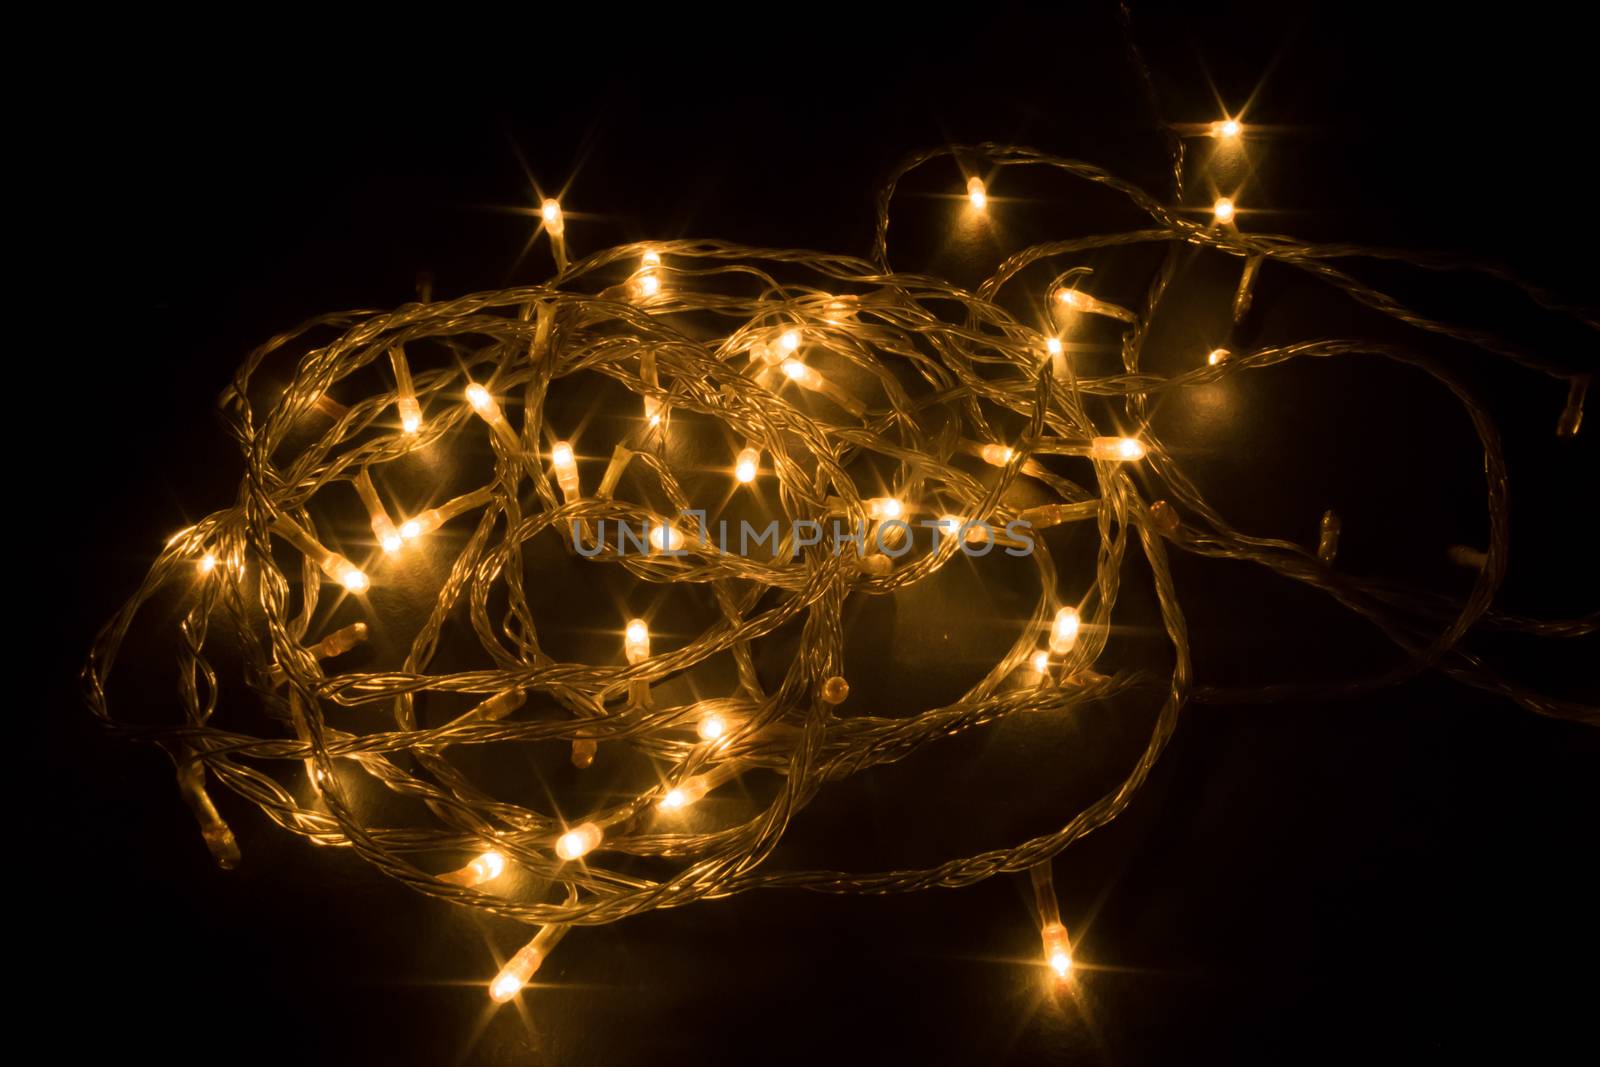 Decorated traditional garland of lights. by sudiptabhowmick